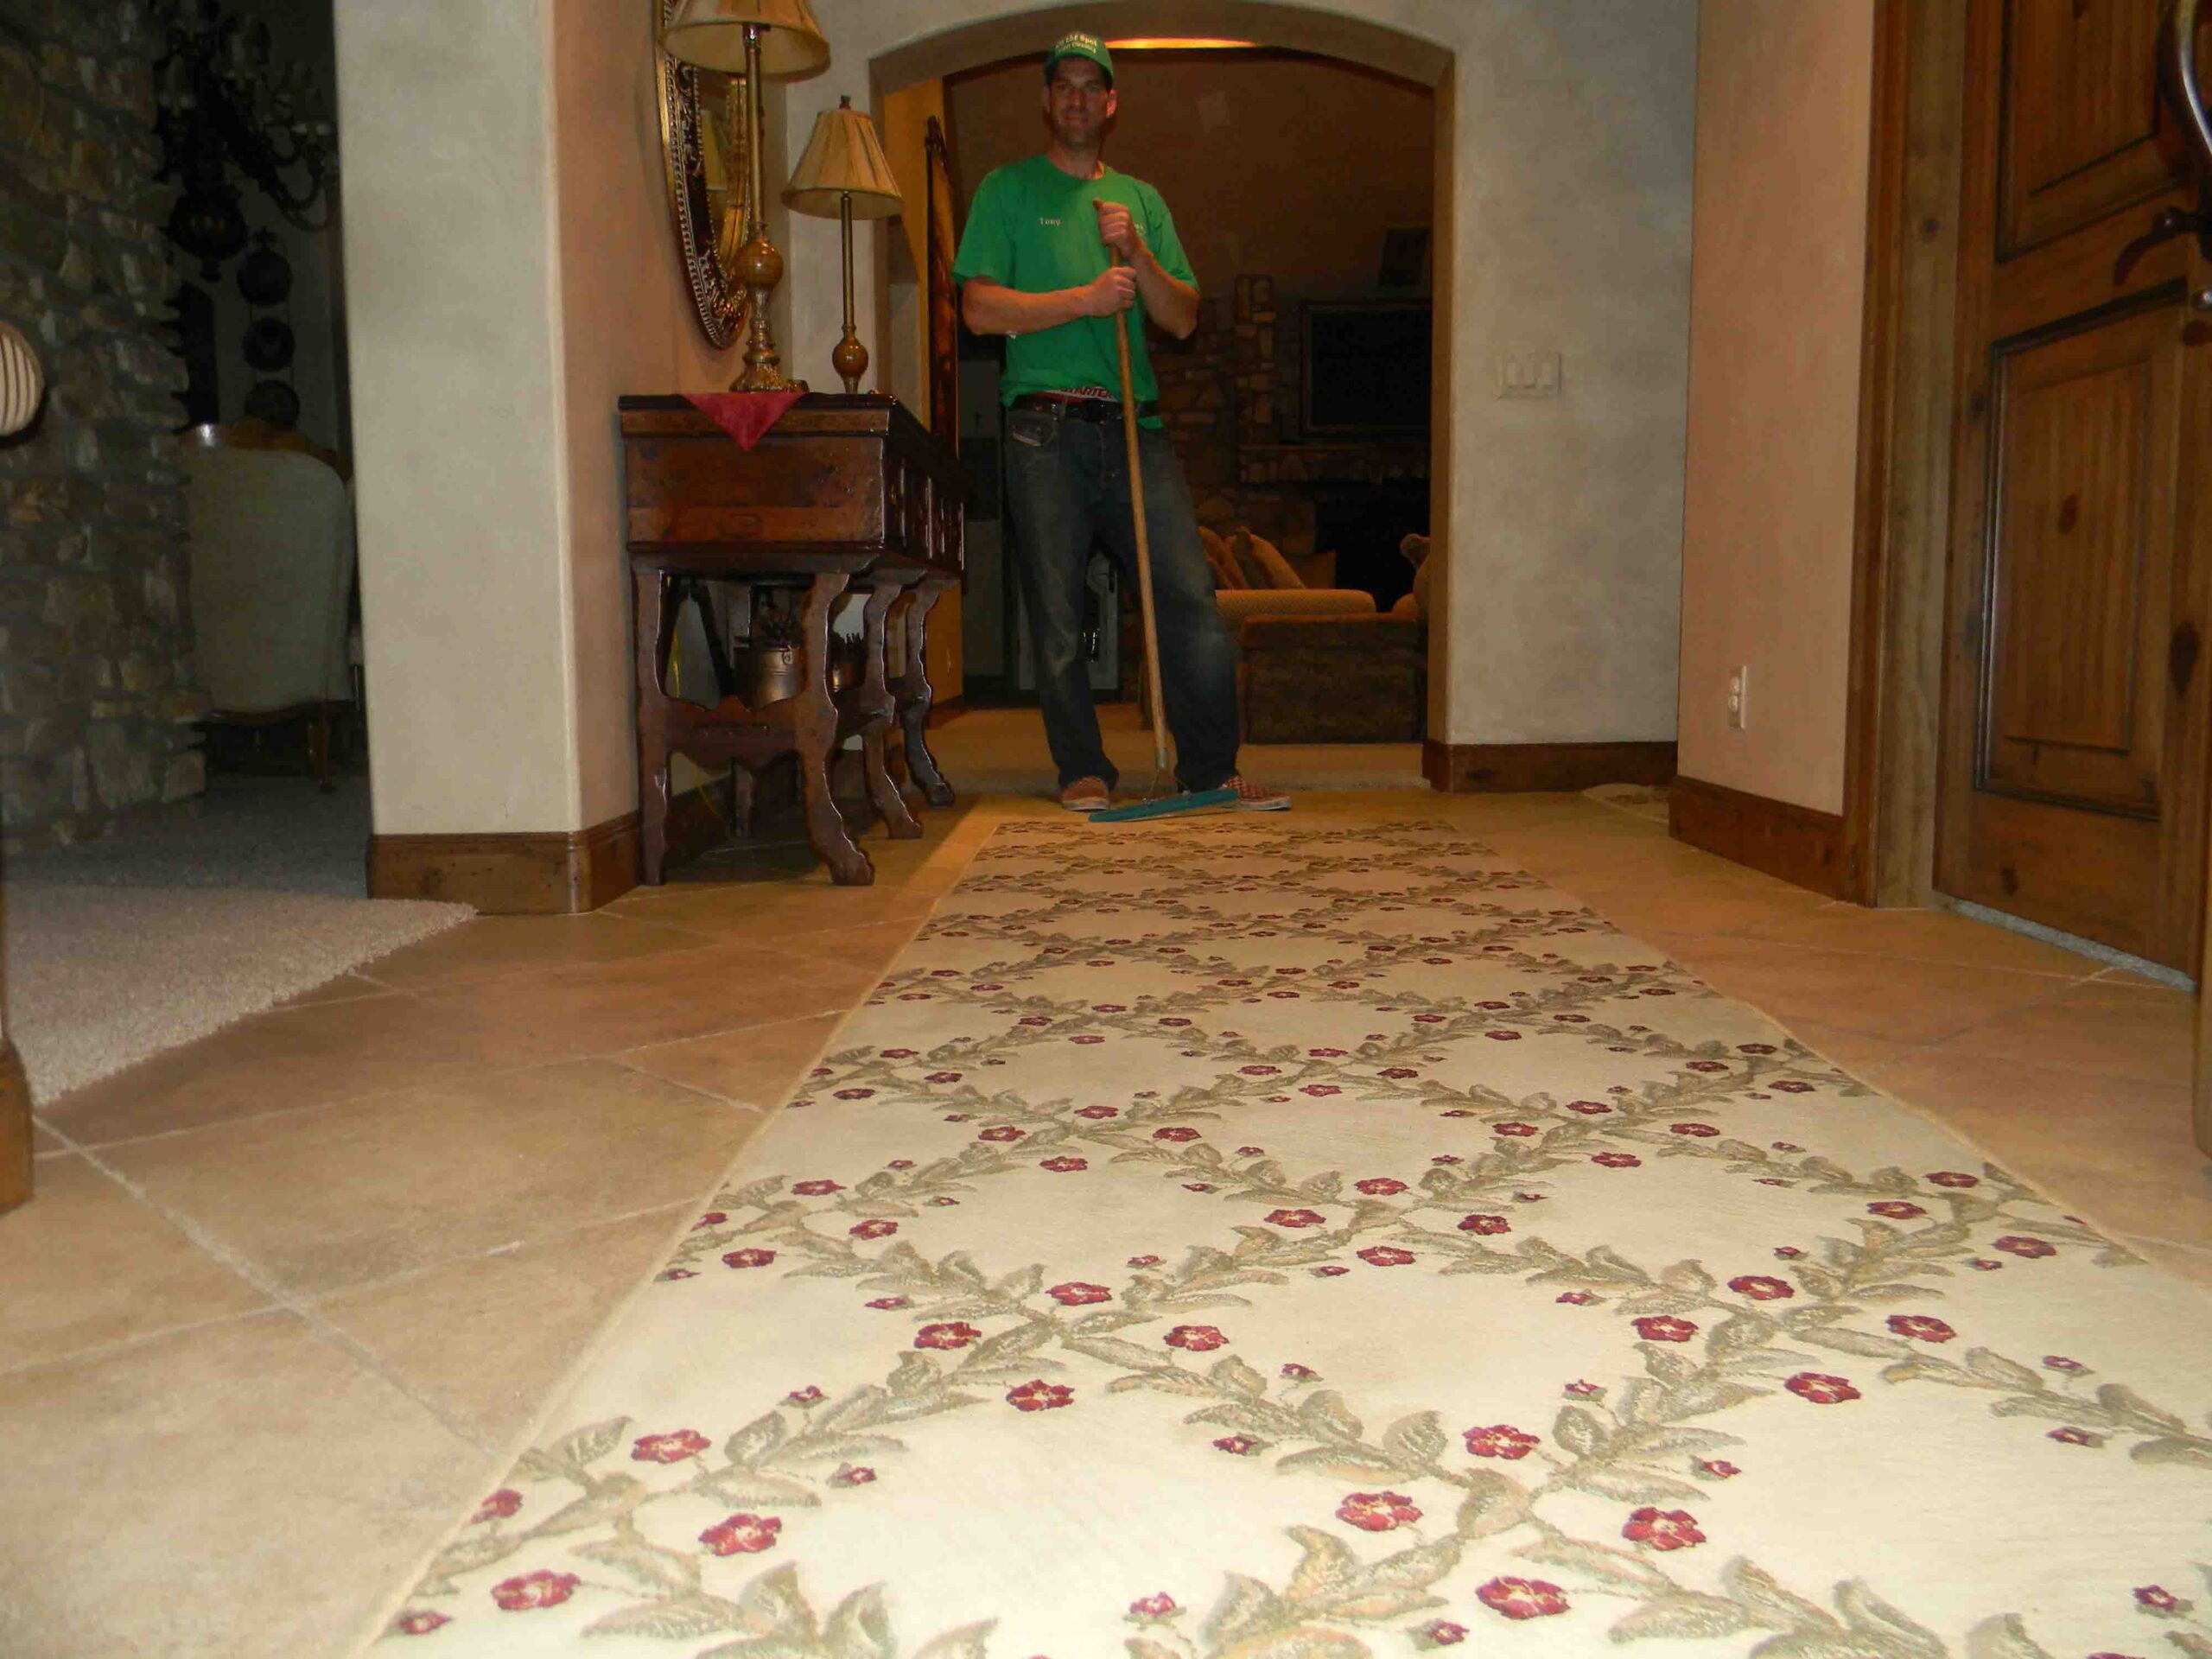 On-The-Spot Cleaning Services - Owner, Tony, standing in the entryway of a mansion. He has cleaned, dried, and brushed the carpet clean.